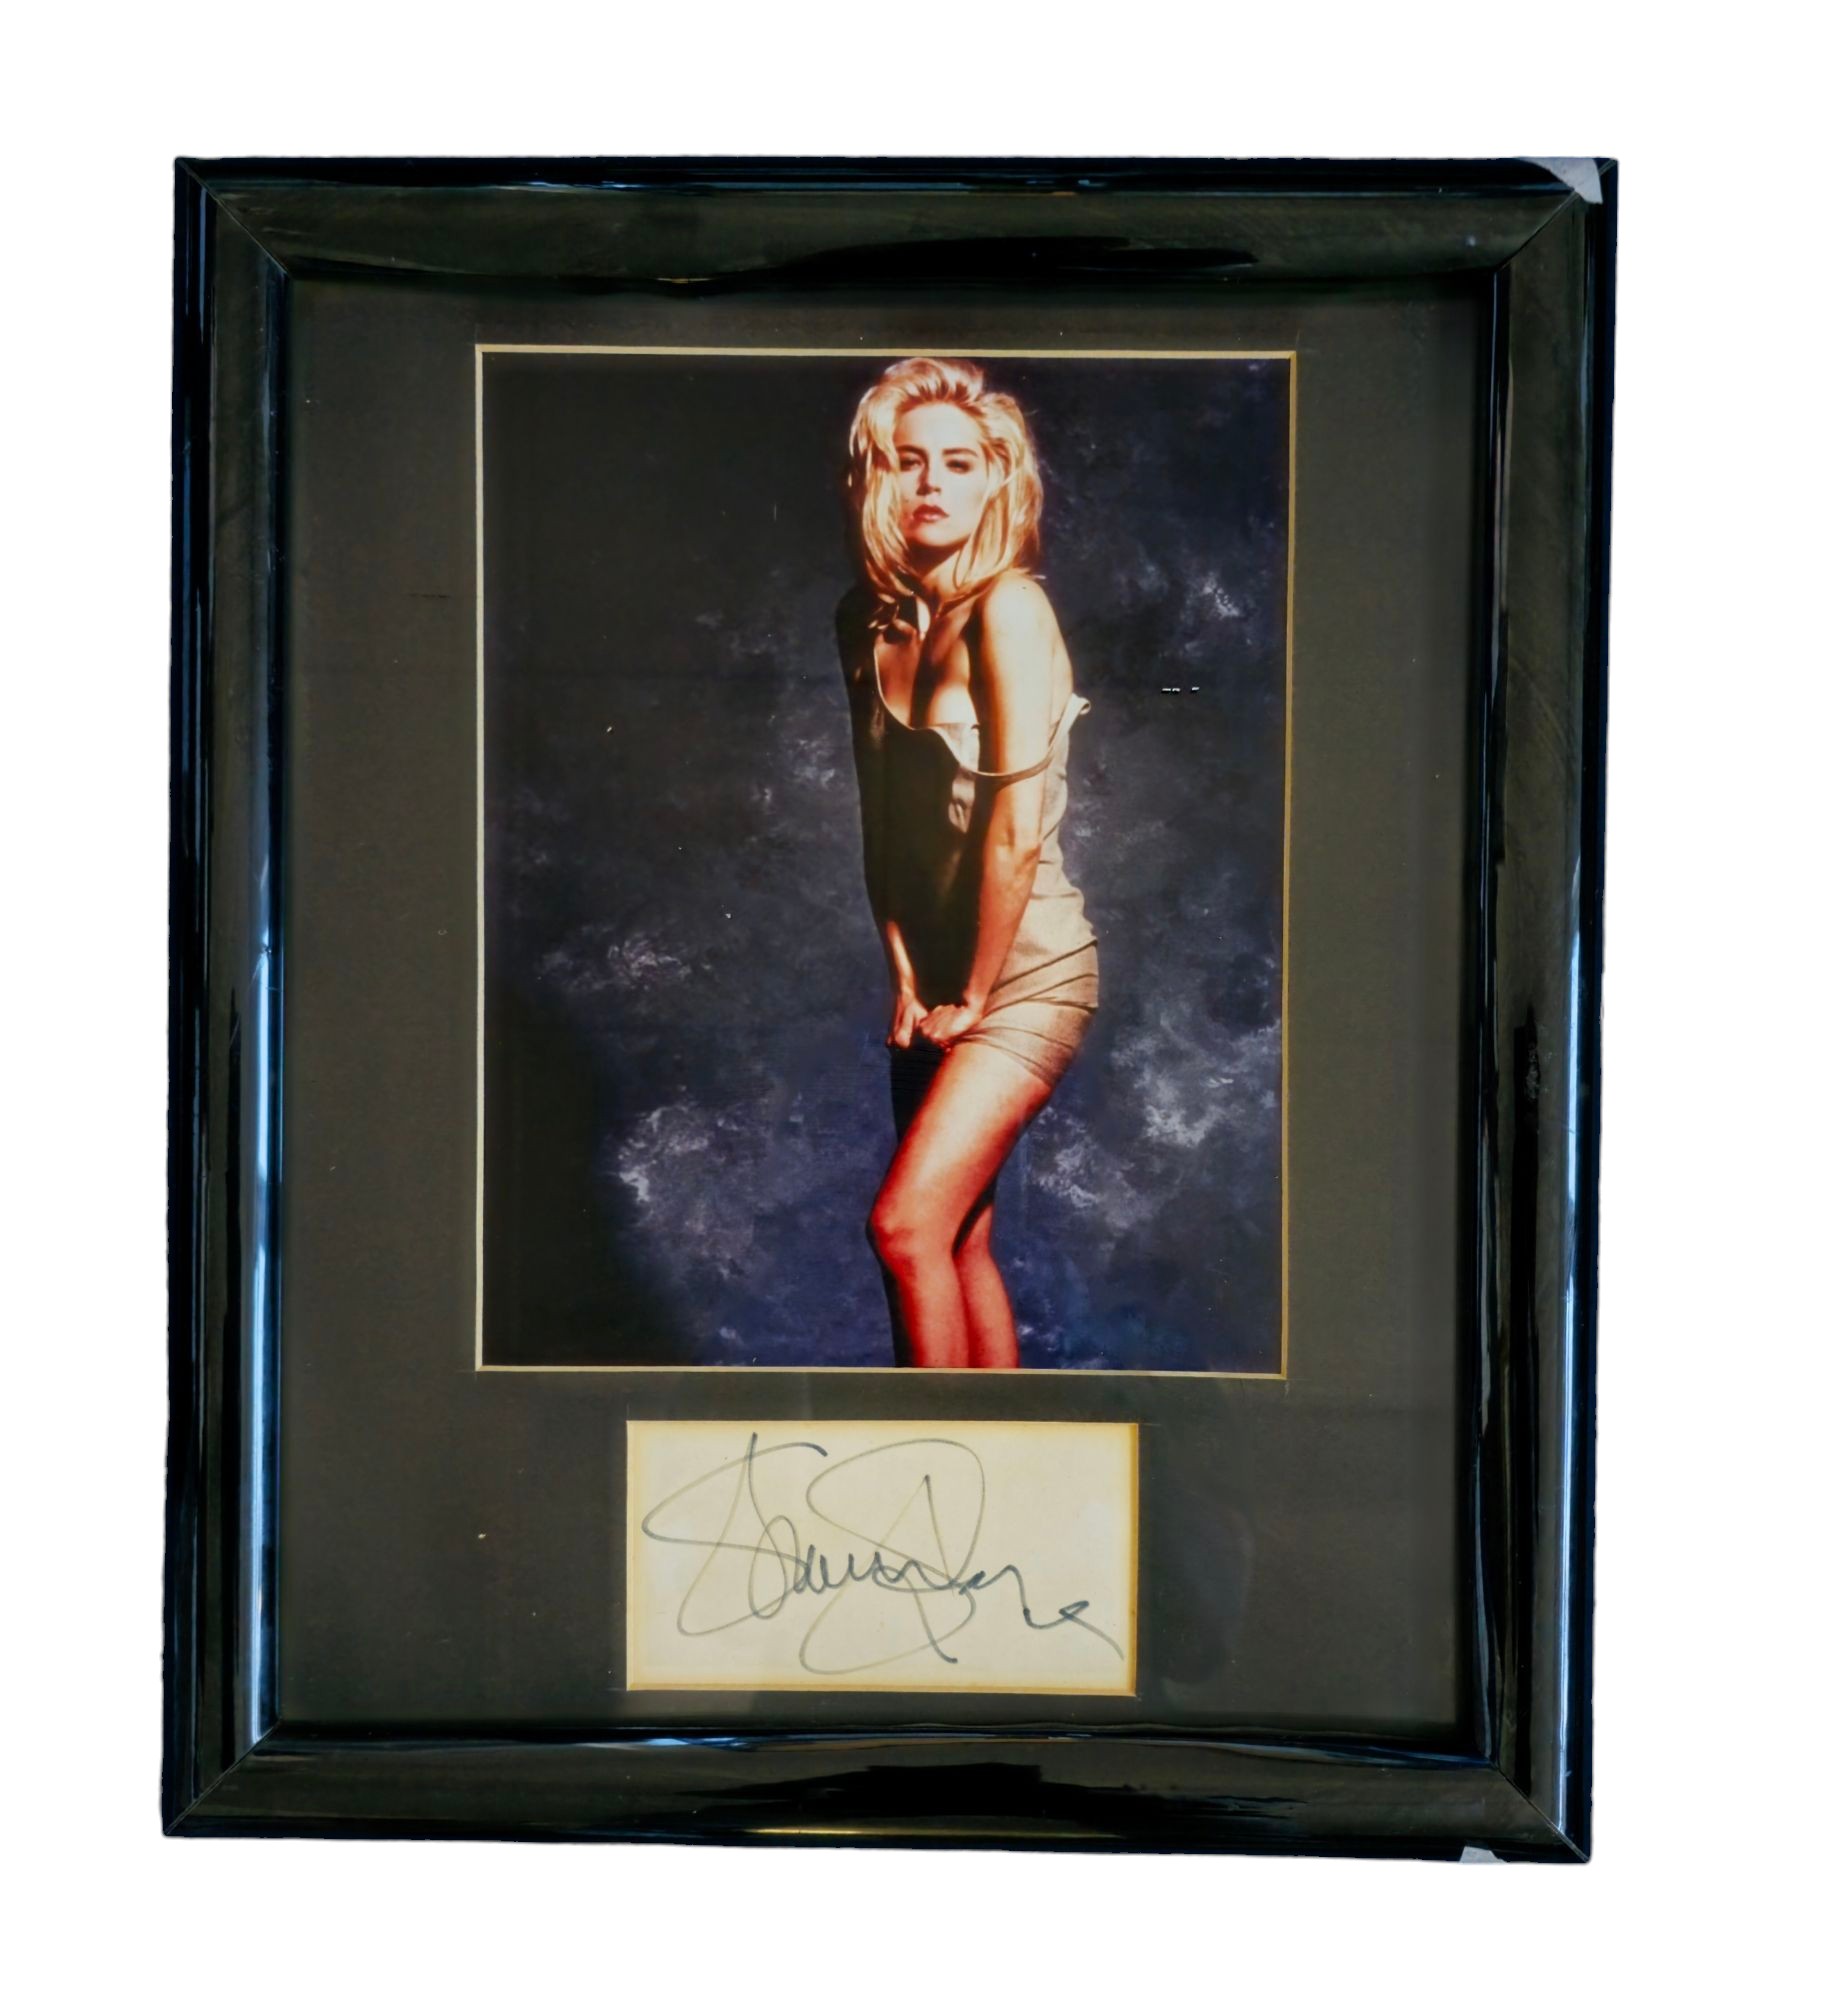 Sharon Stone signature piece with colour photo. Framed. Measures 13 inch by 15-inch appx. Good